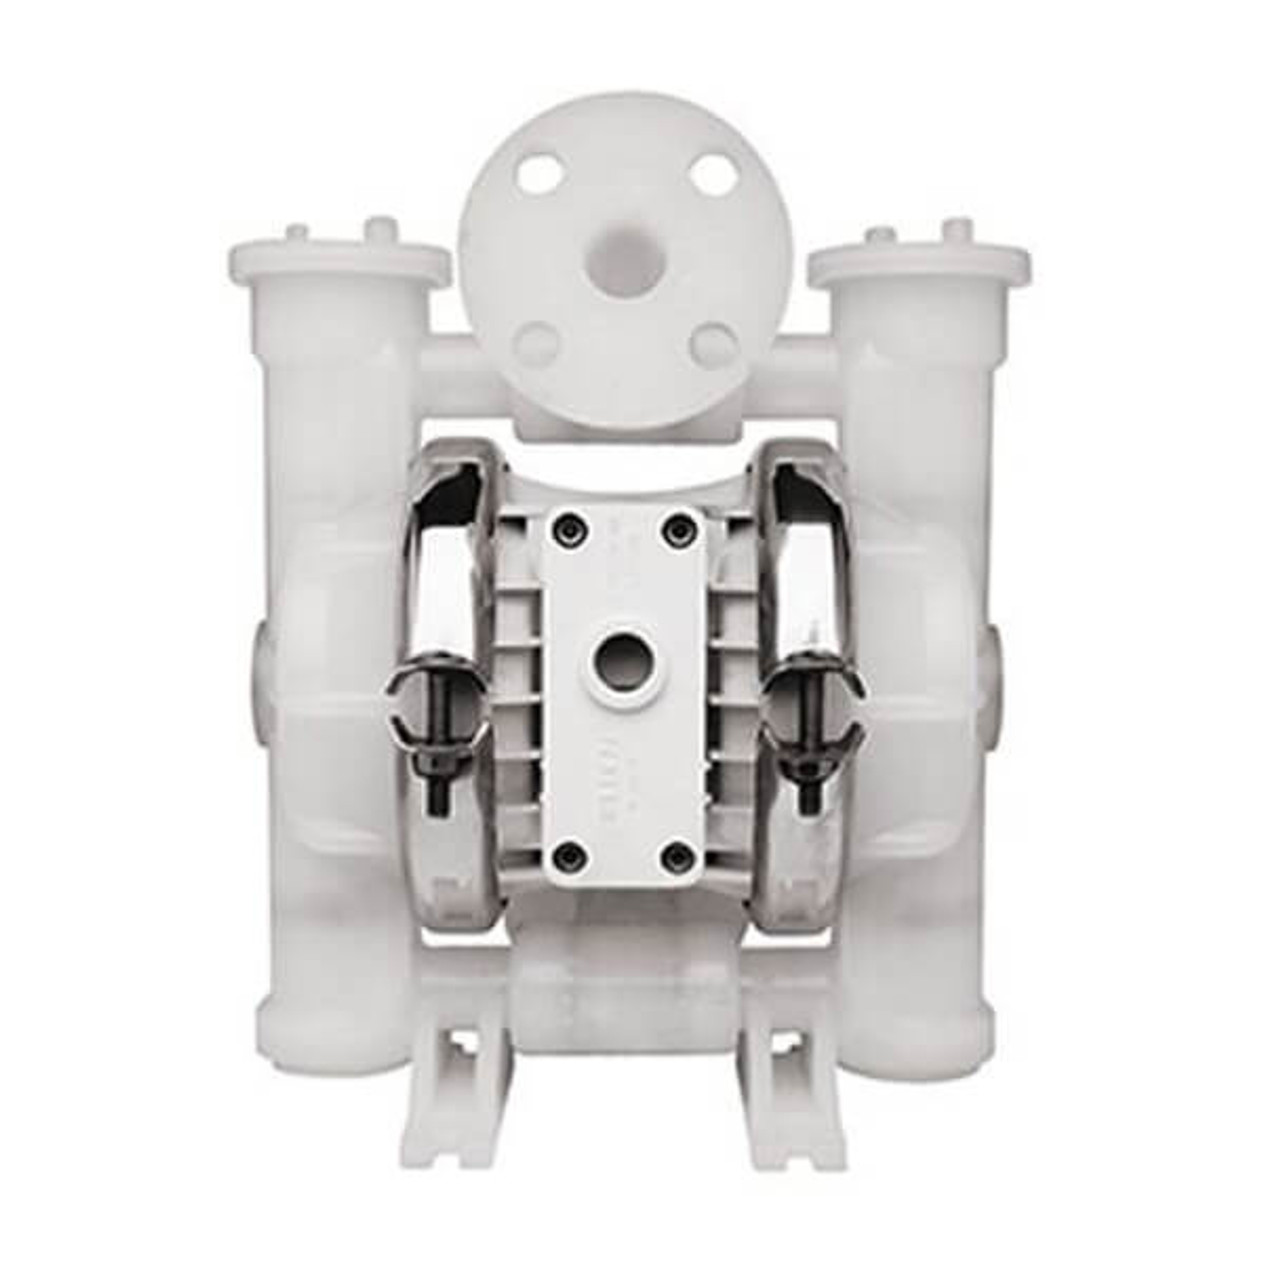 Wilden 02-6245 1" Pro-Flo Air Operated Double Diaphragm Pump